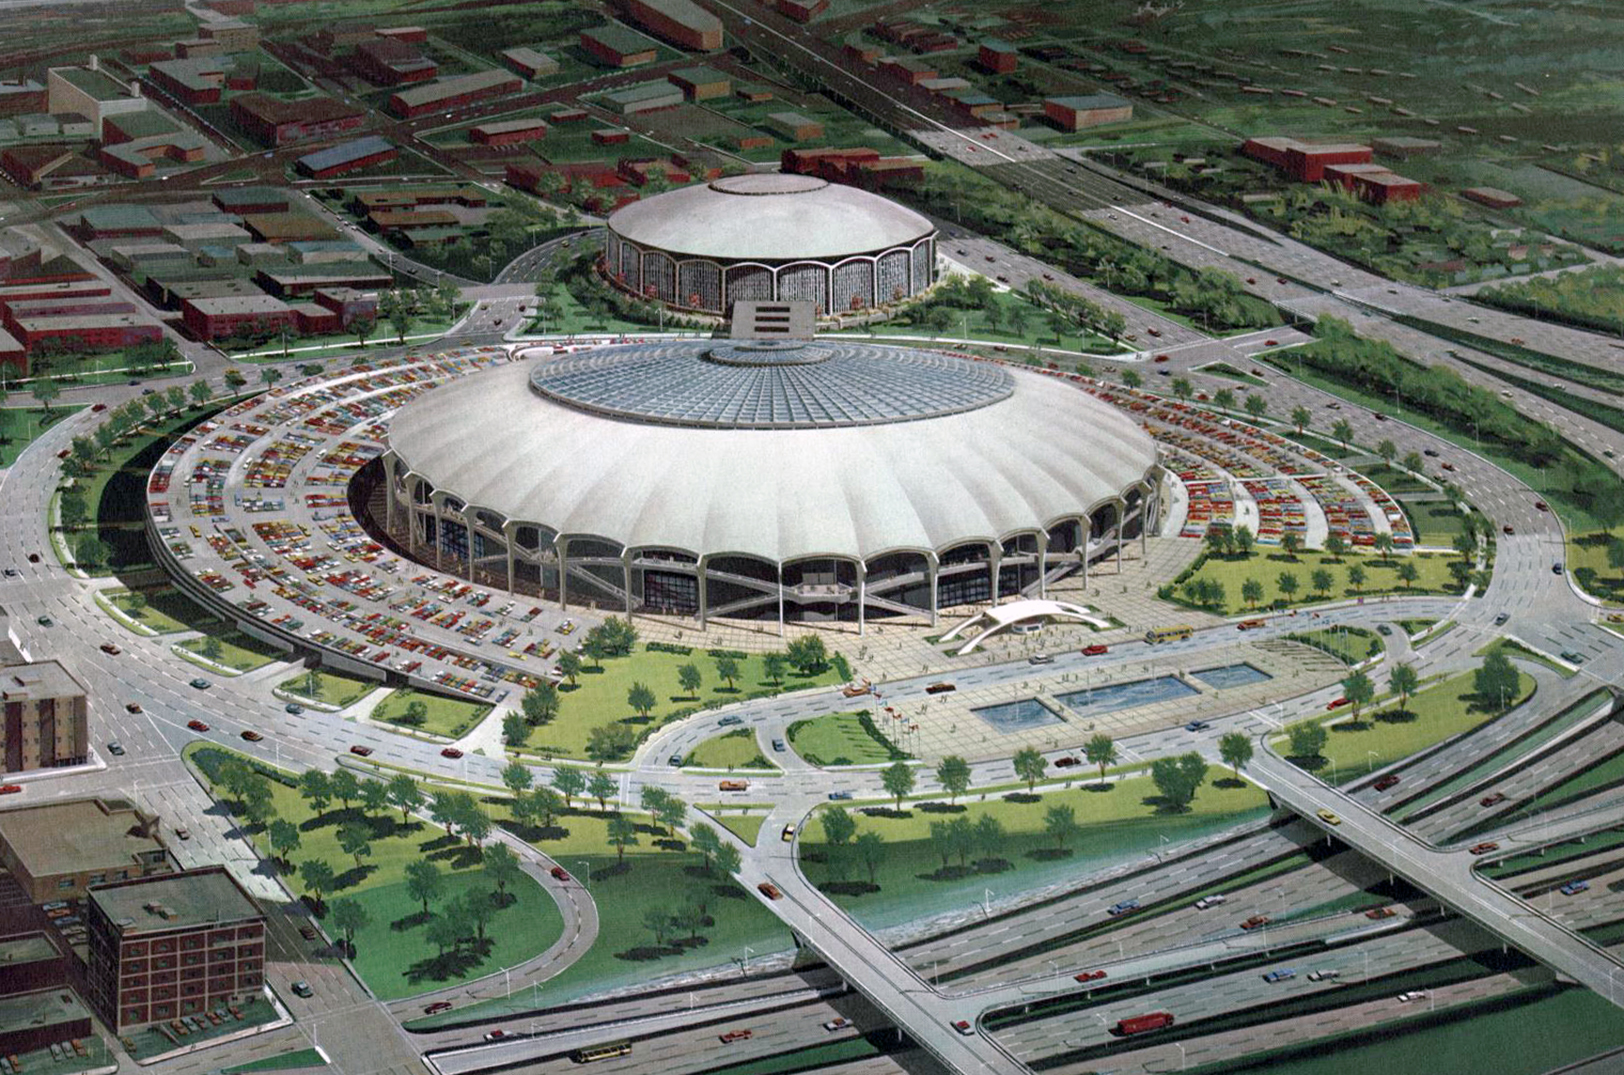 Royals’ pitch for a Crossroads ballpark isn’t the first; what struck out KC’s plans for a domed downtown stadium 60 years ago?